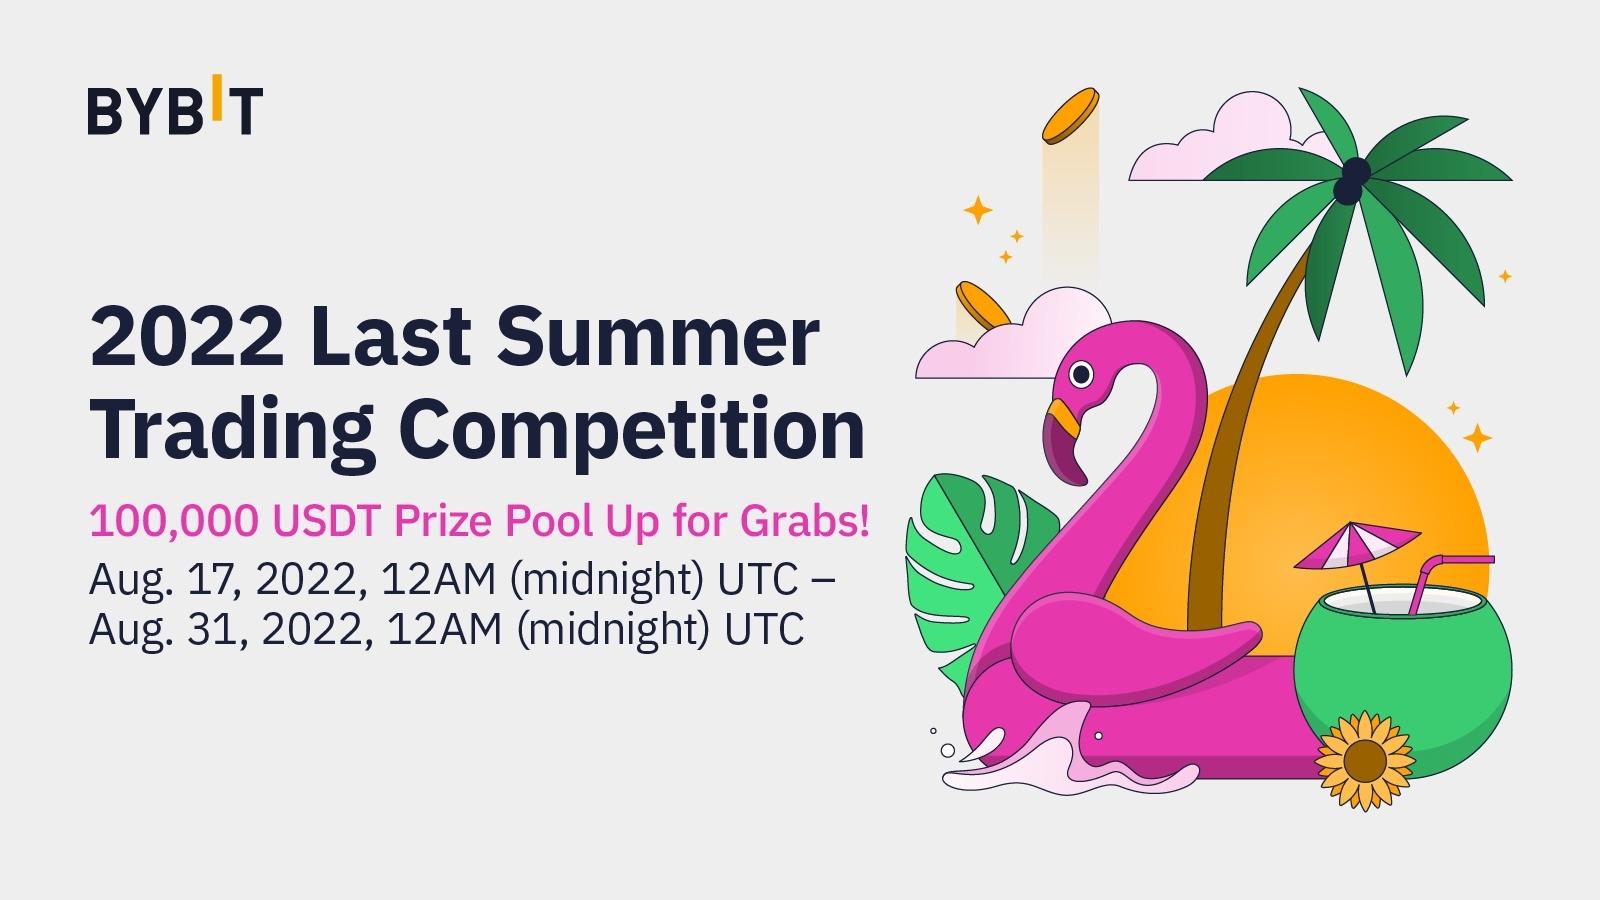 ☀️ 2022 Last Summer Trading Competition: Grab a Share of the 100,000 USDT Prize Pool!